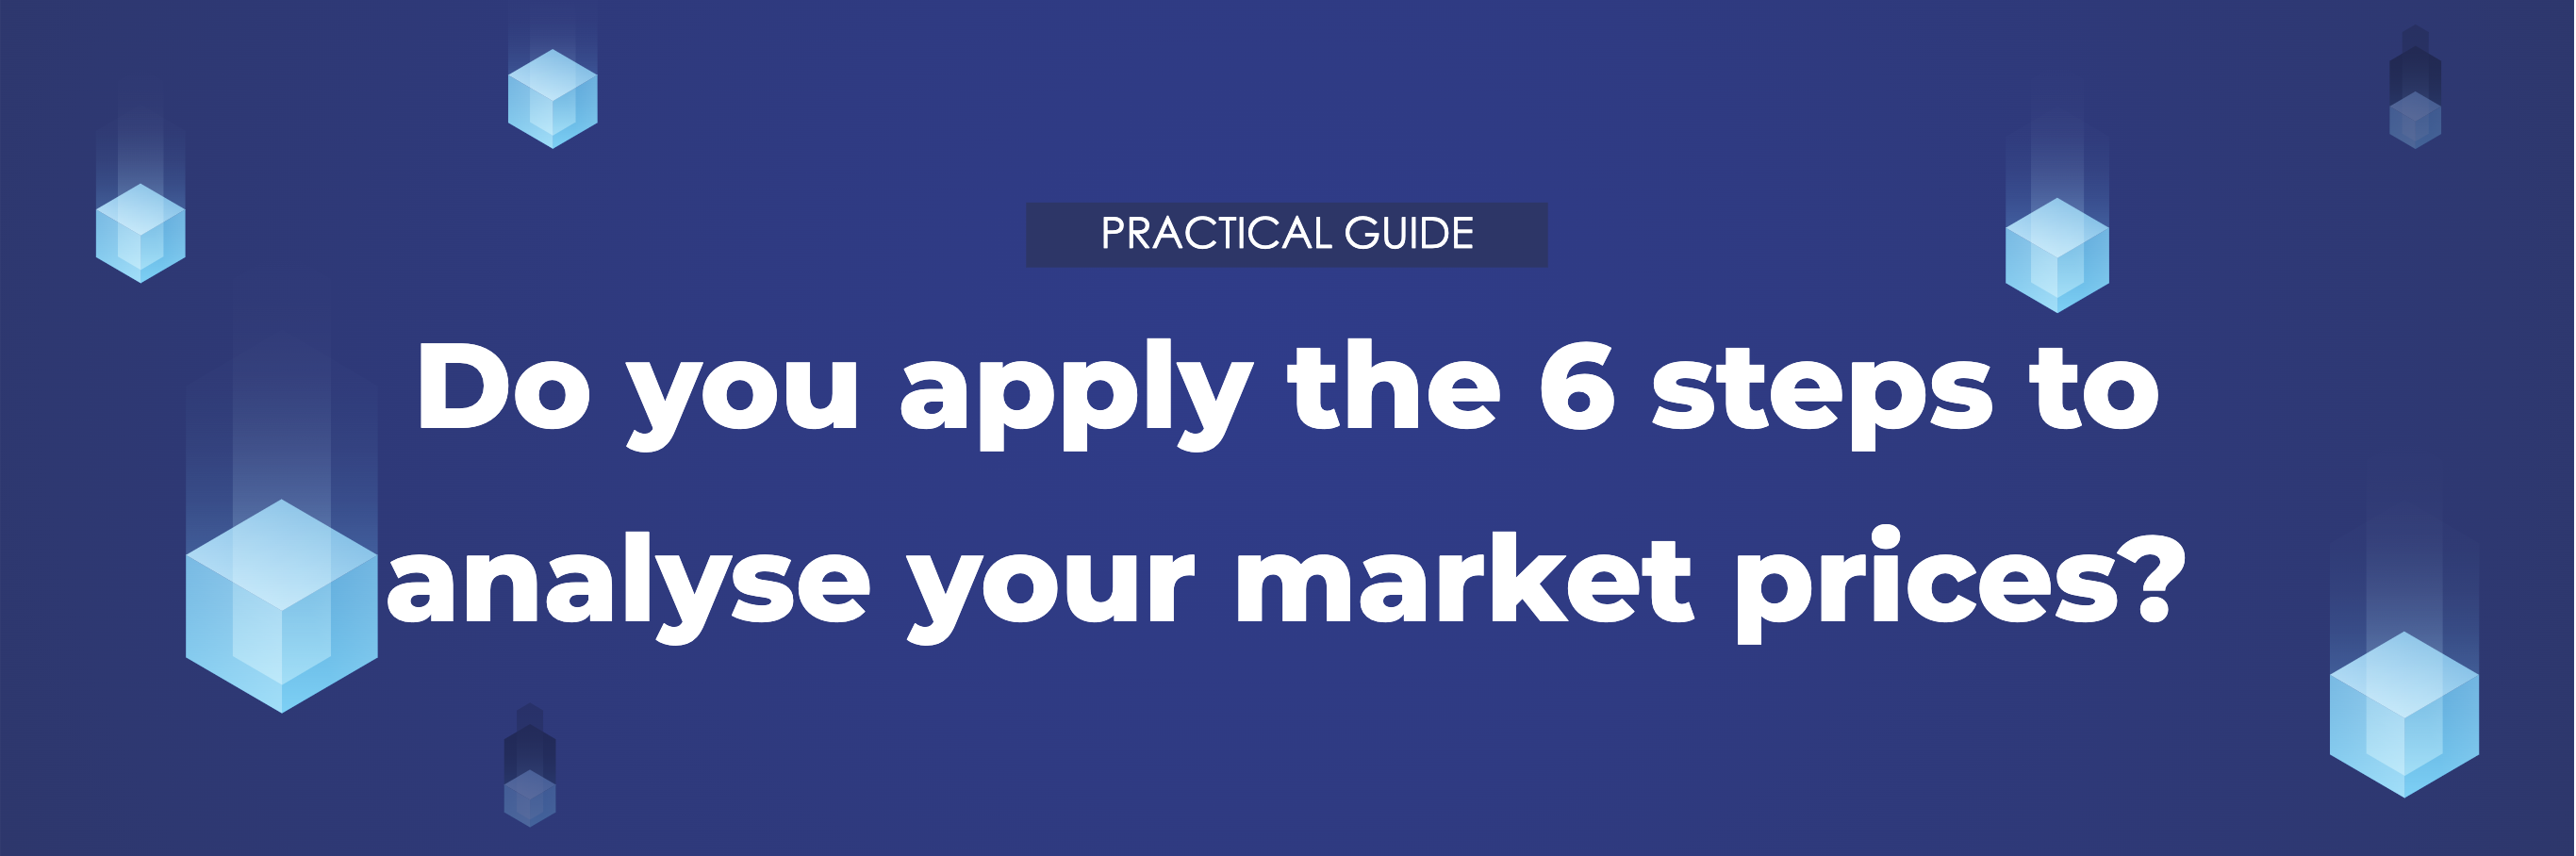 [Practical guide] Do you apply the 6 steps to analyse your market prices?